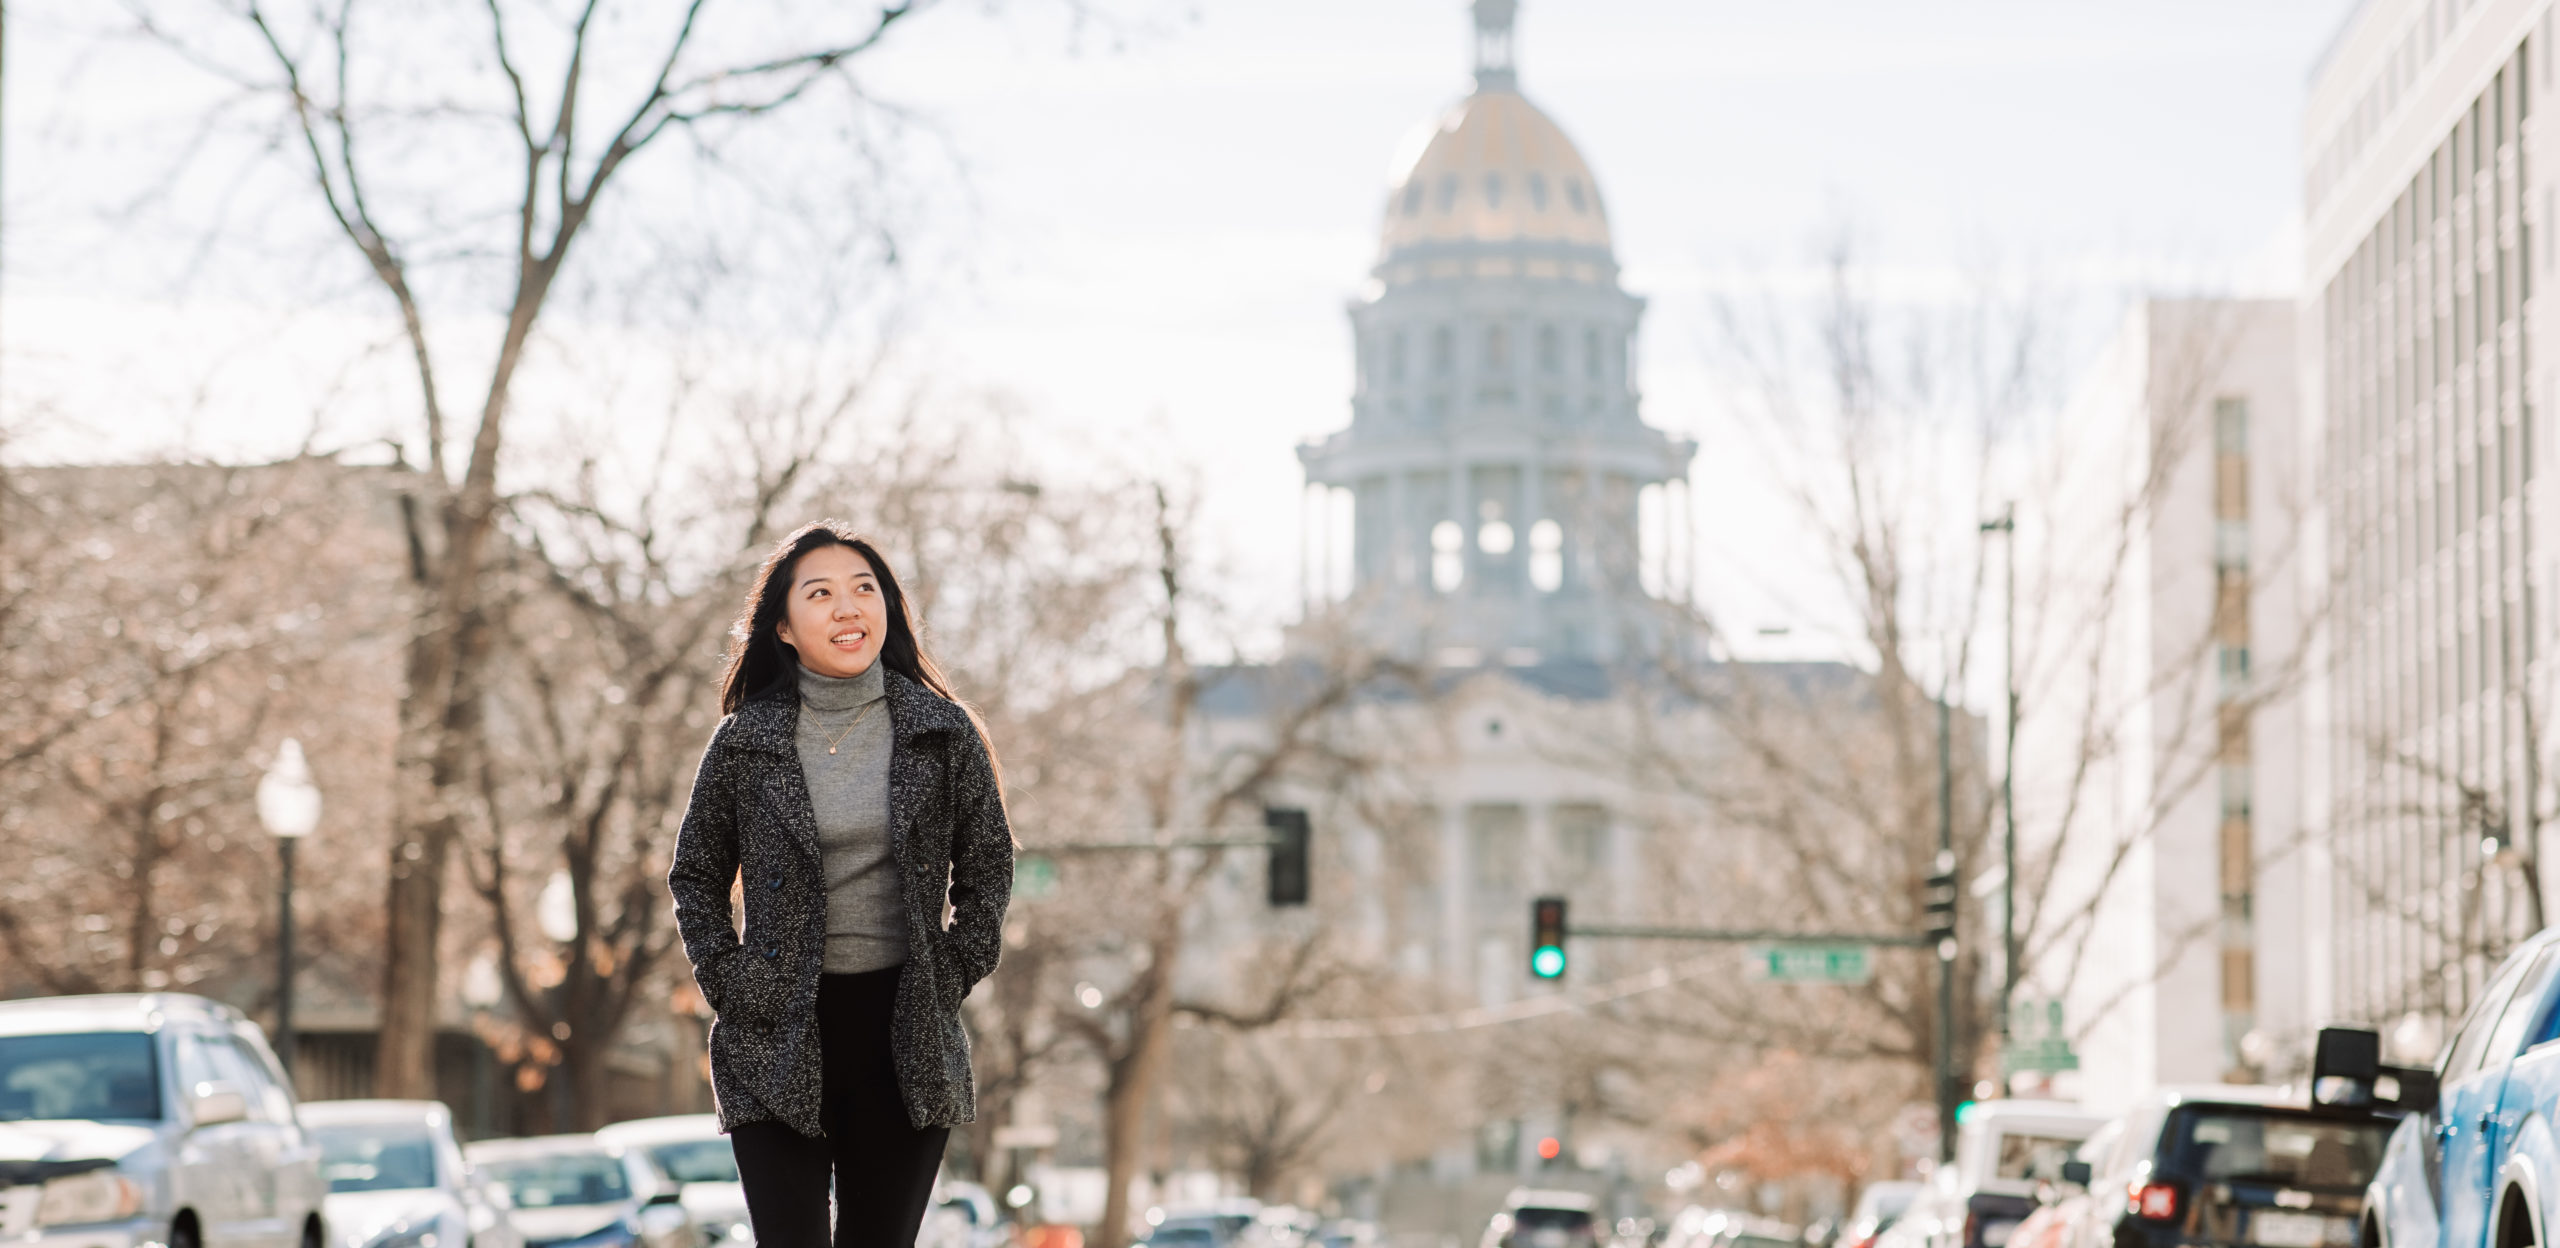 Li Chen Chen, an English major at MSU Denver, is among six students selected for a new internship focused on public service.